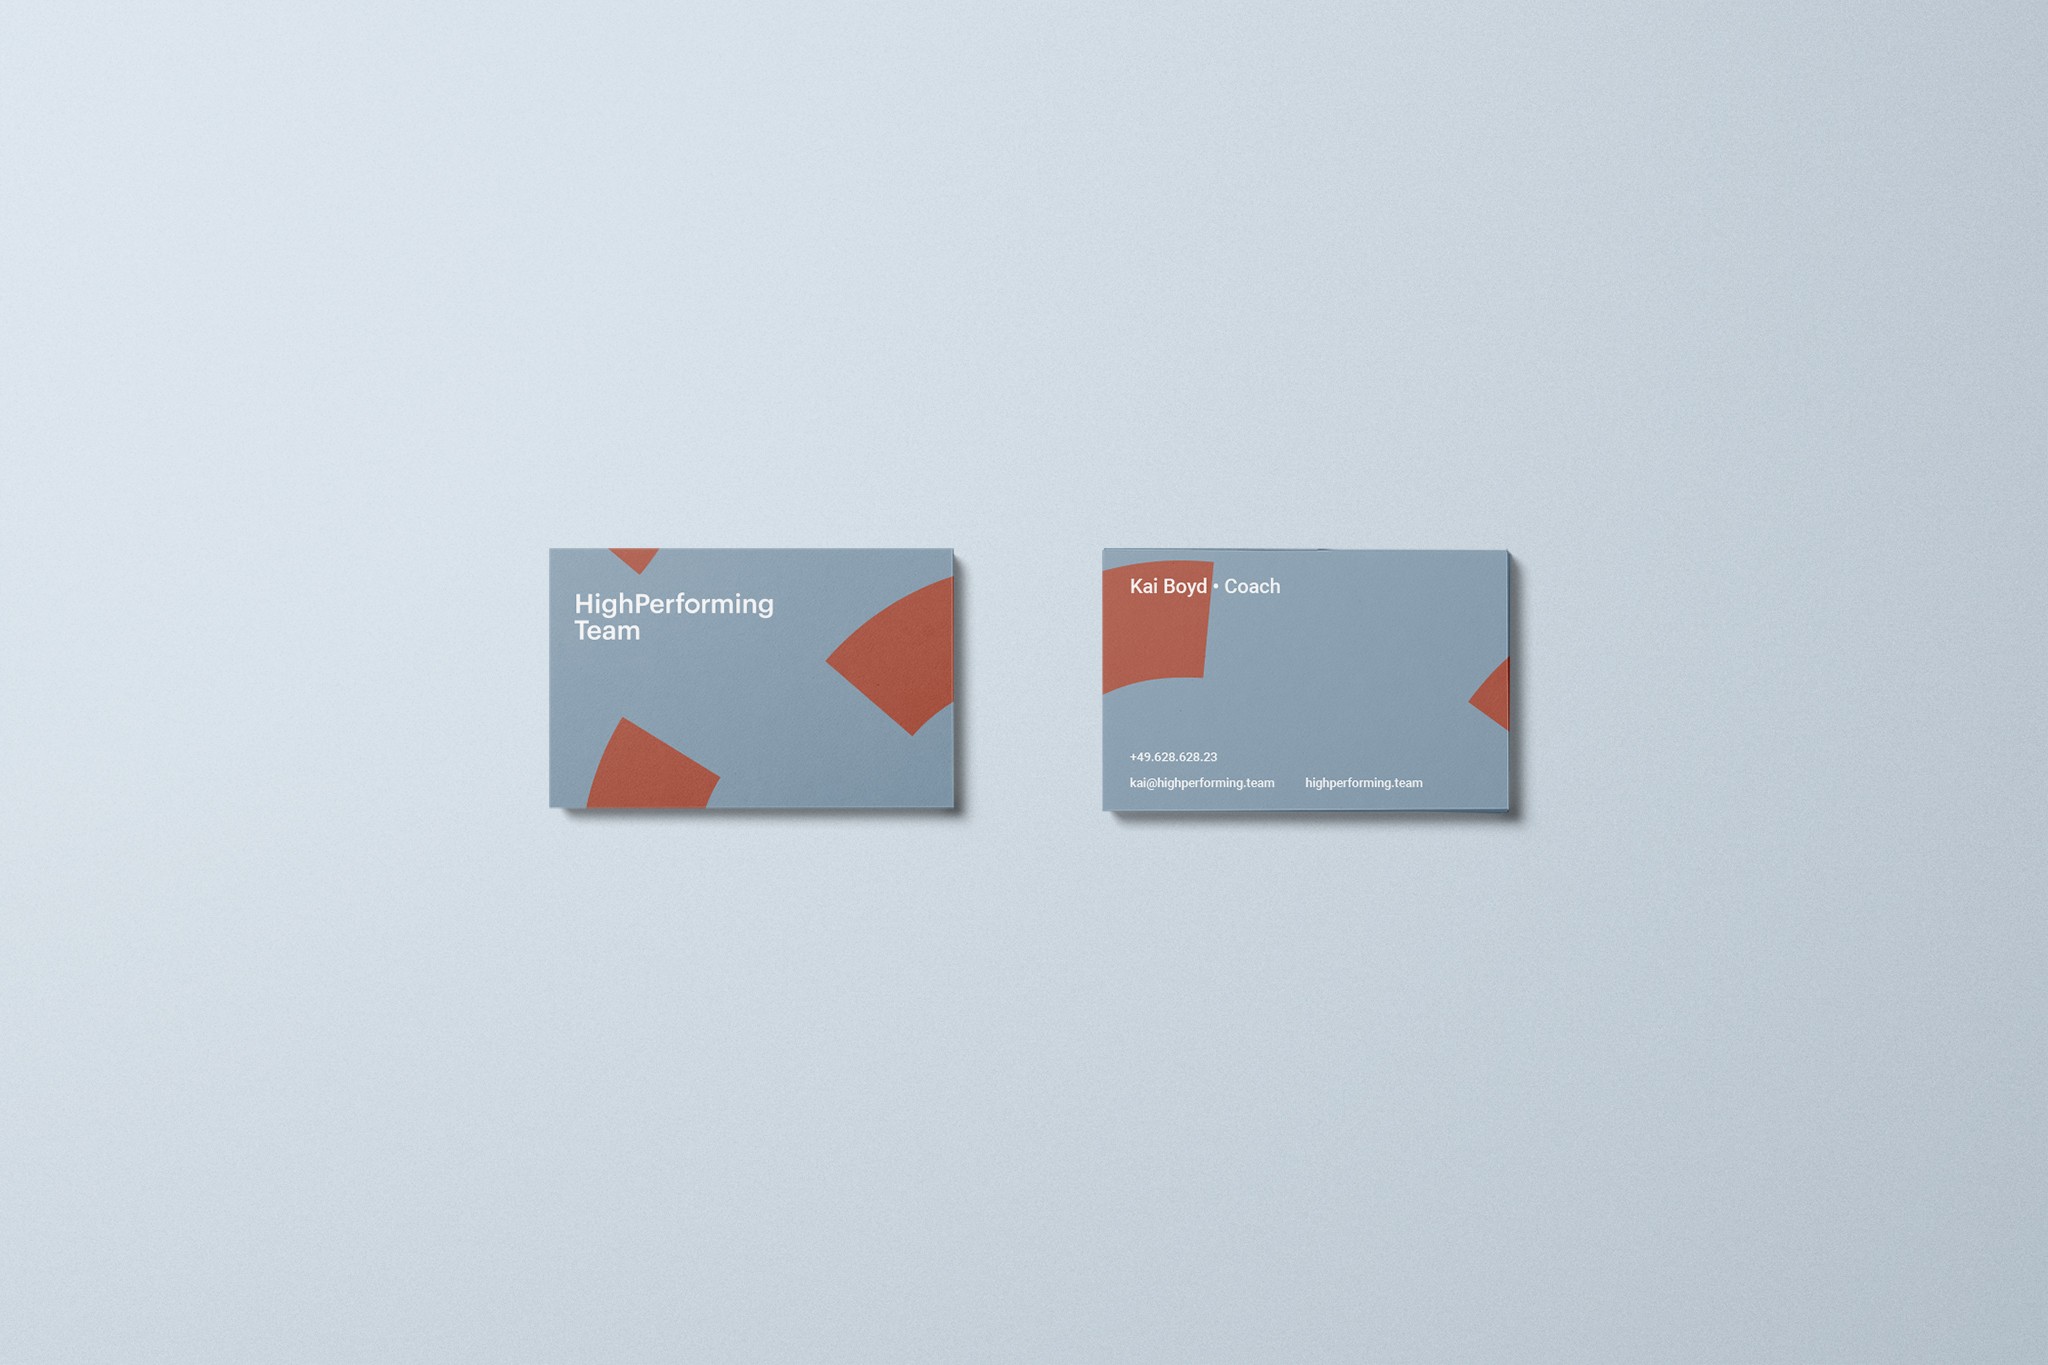 image shows a business card from the front and back using an exploded ring as decorative element